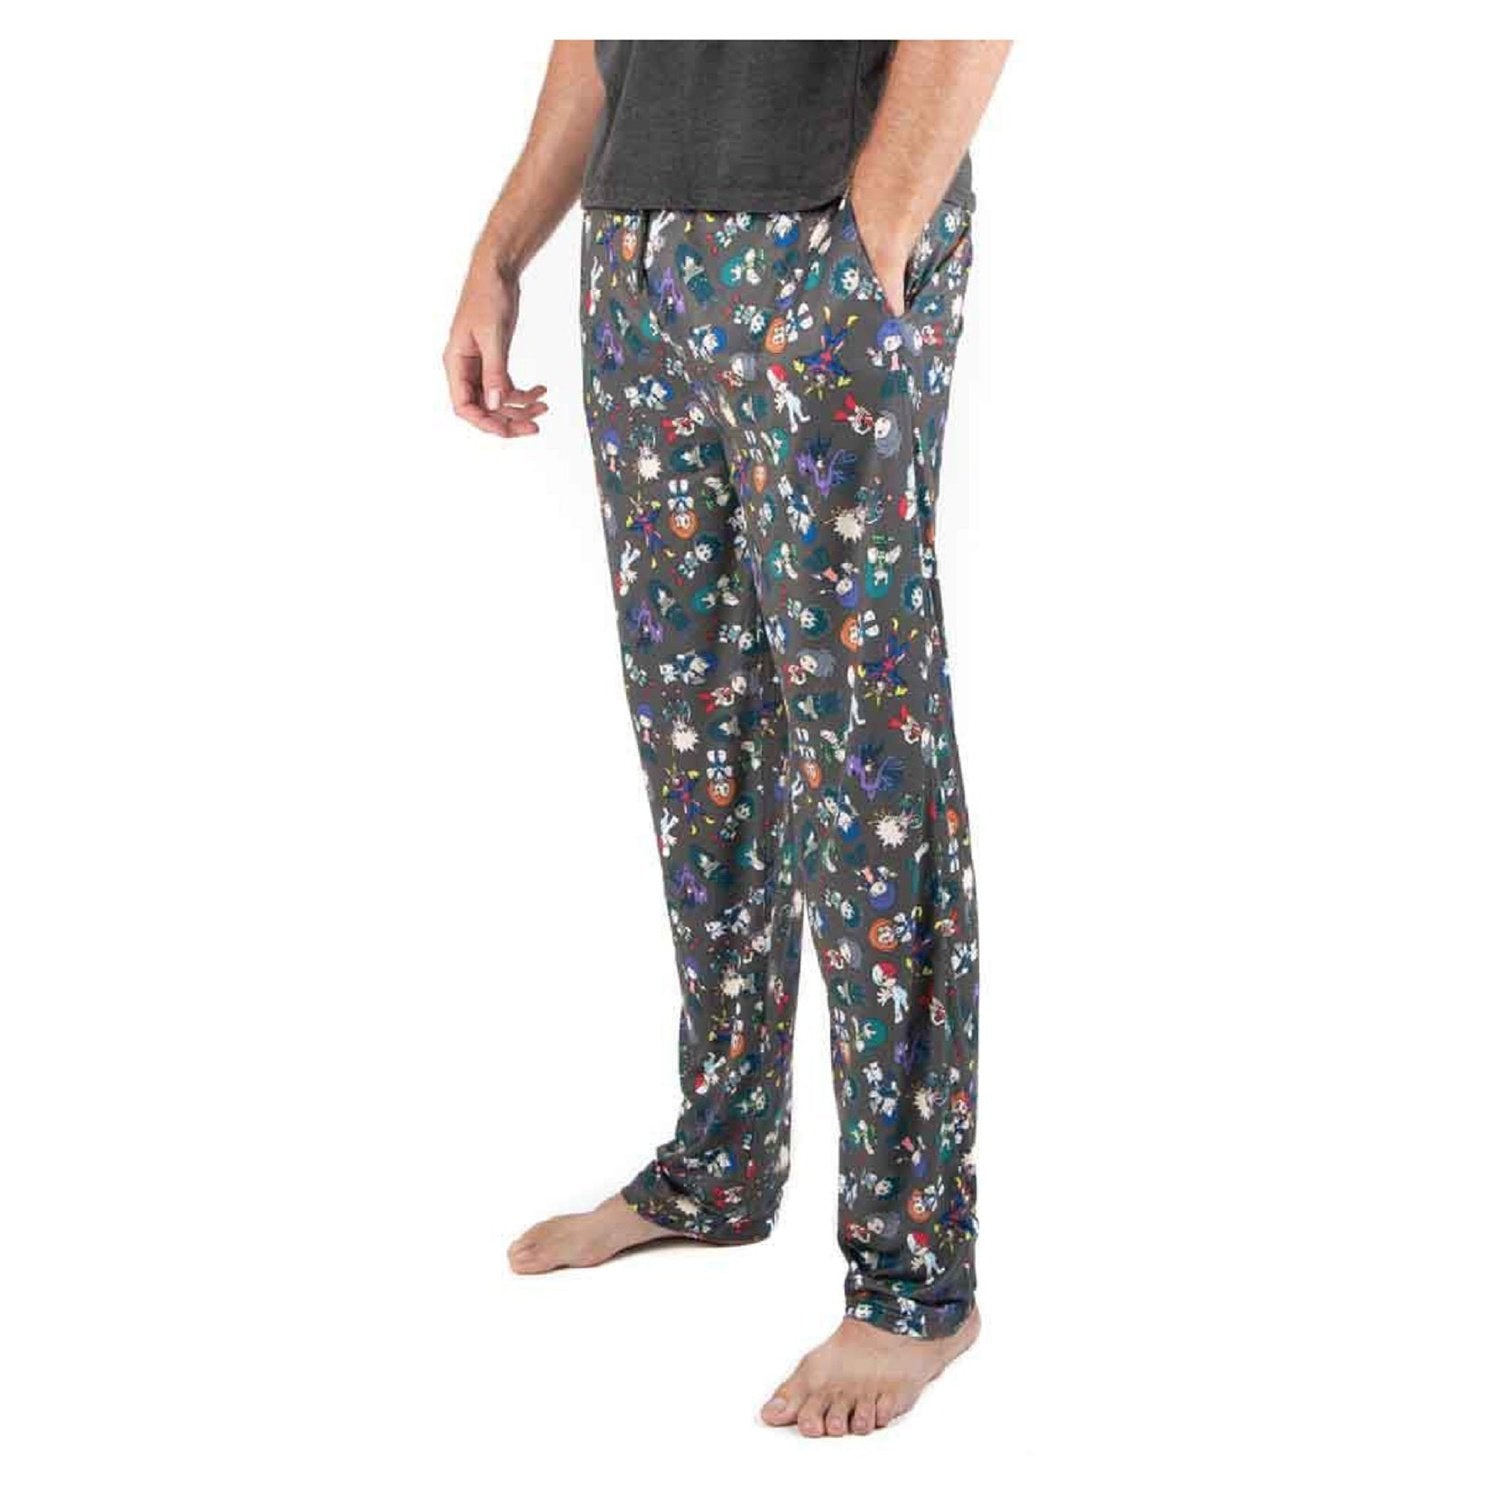 Buy Womens Anime Pajama Pants Ahegao Girls Pattern Online in India  Etsy